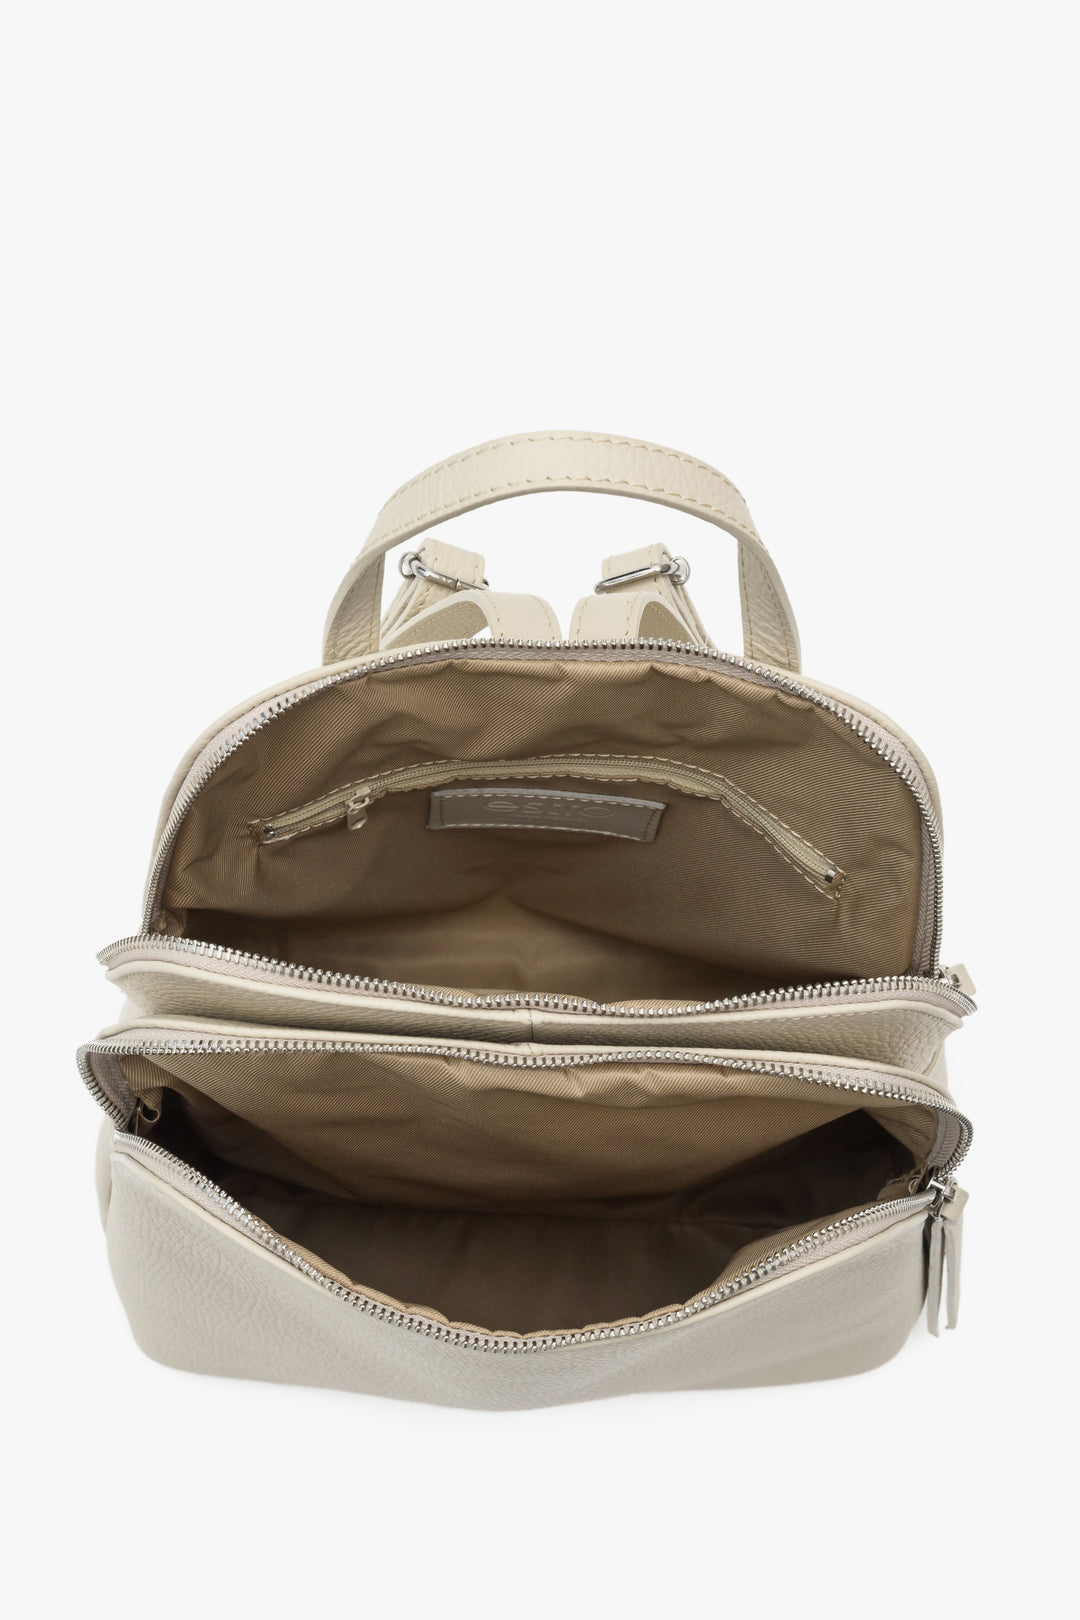 Leather women's backpack by Estro in light beige - close-up on the interior of the model.